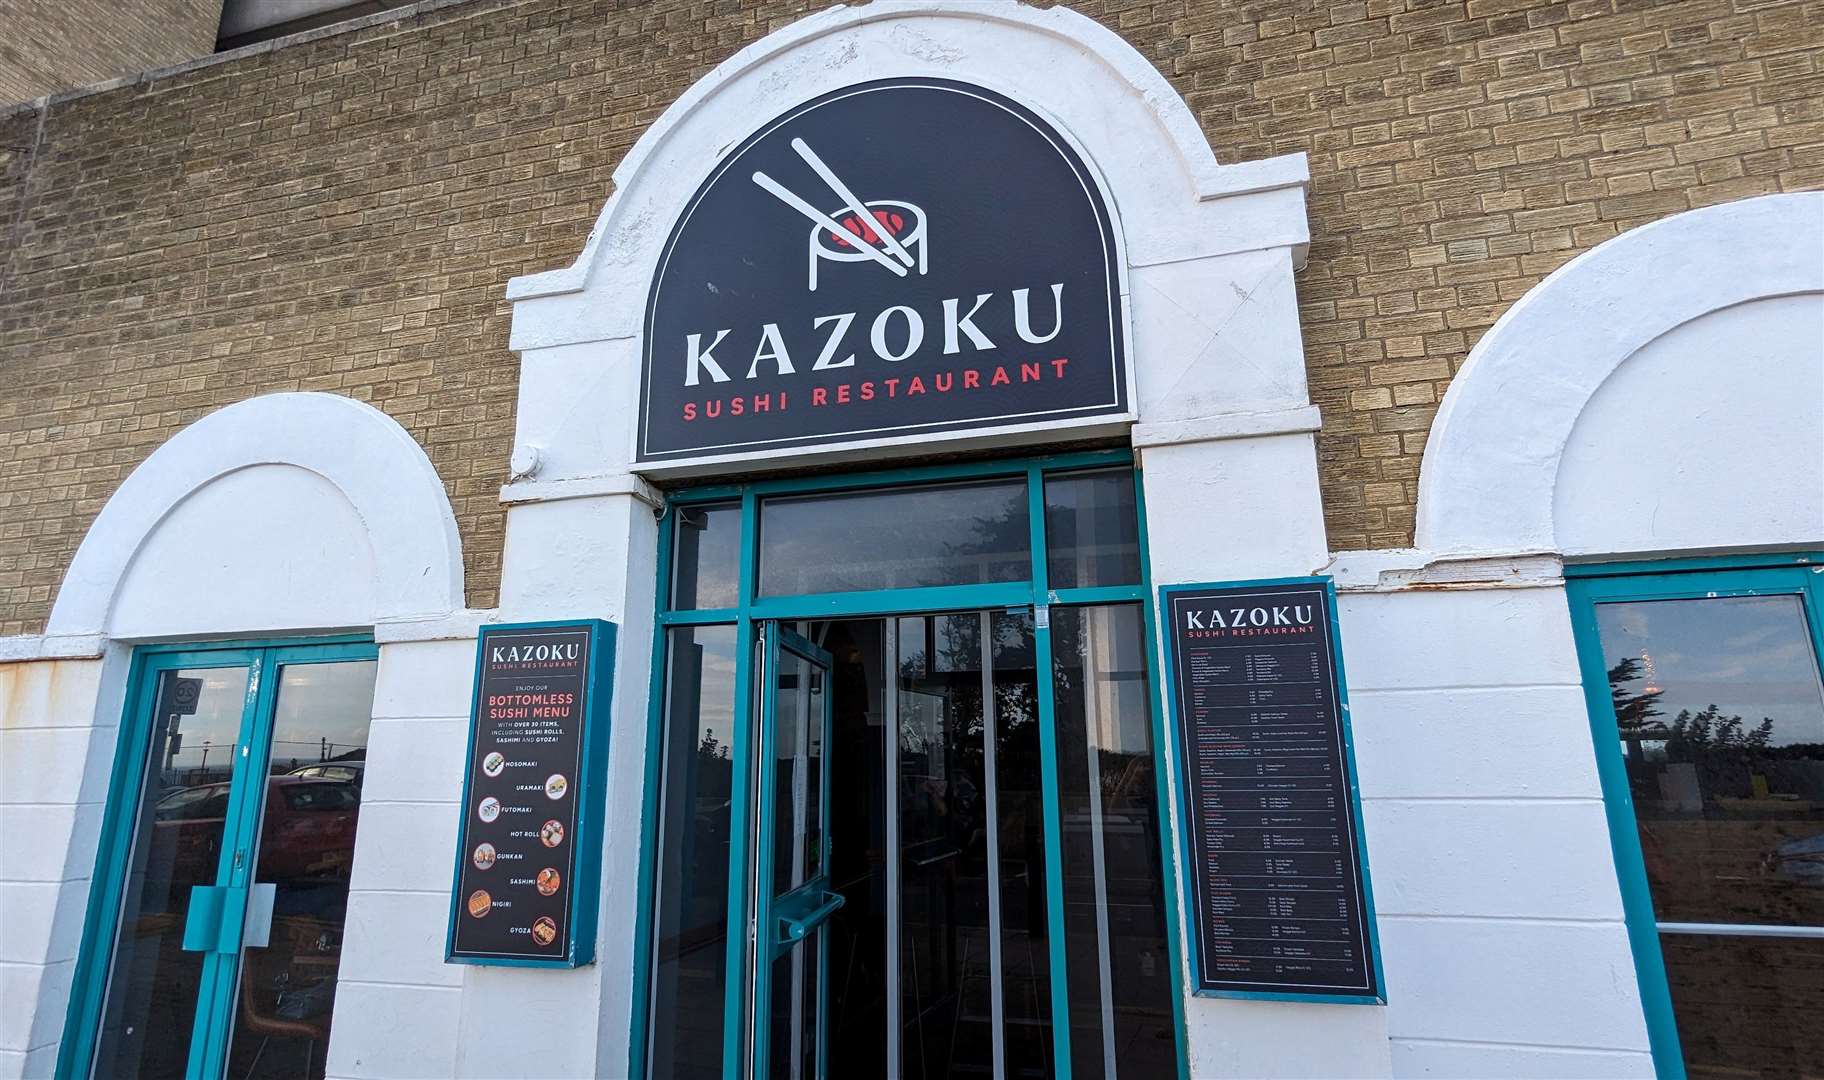 Kazoku is situated on The Leas in Folkestone town centre